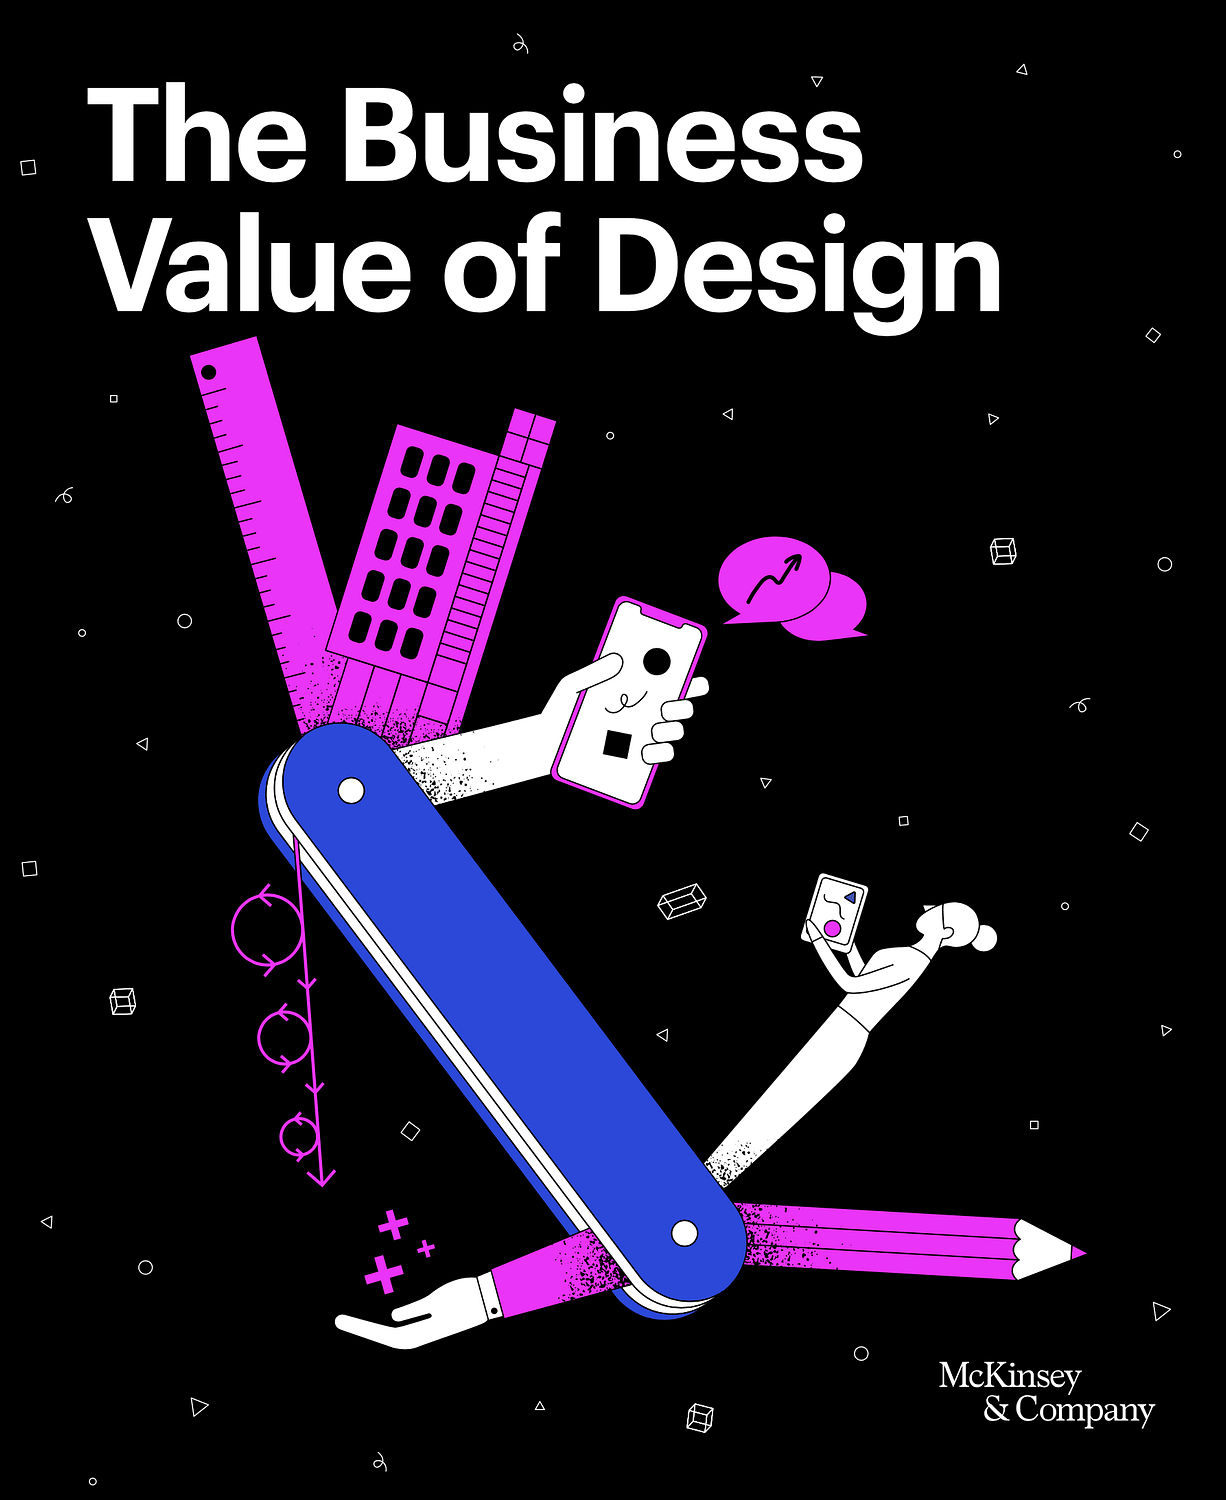 The Business Value of Design McKinsey